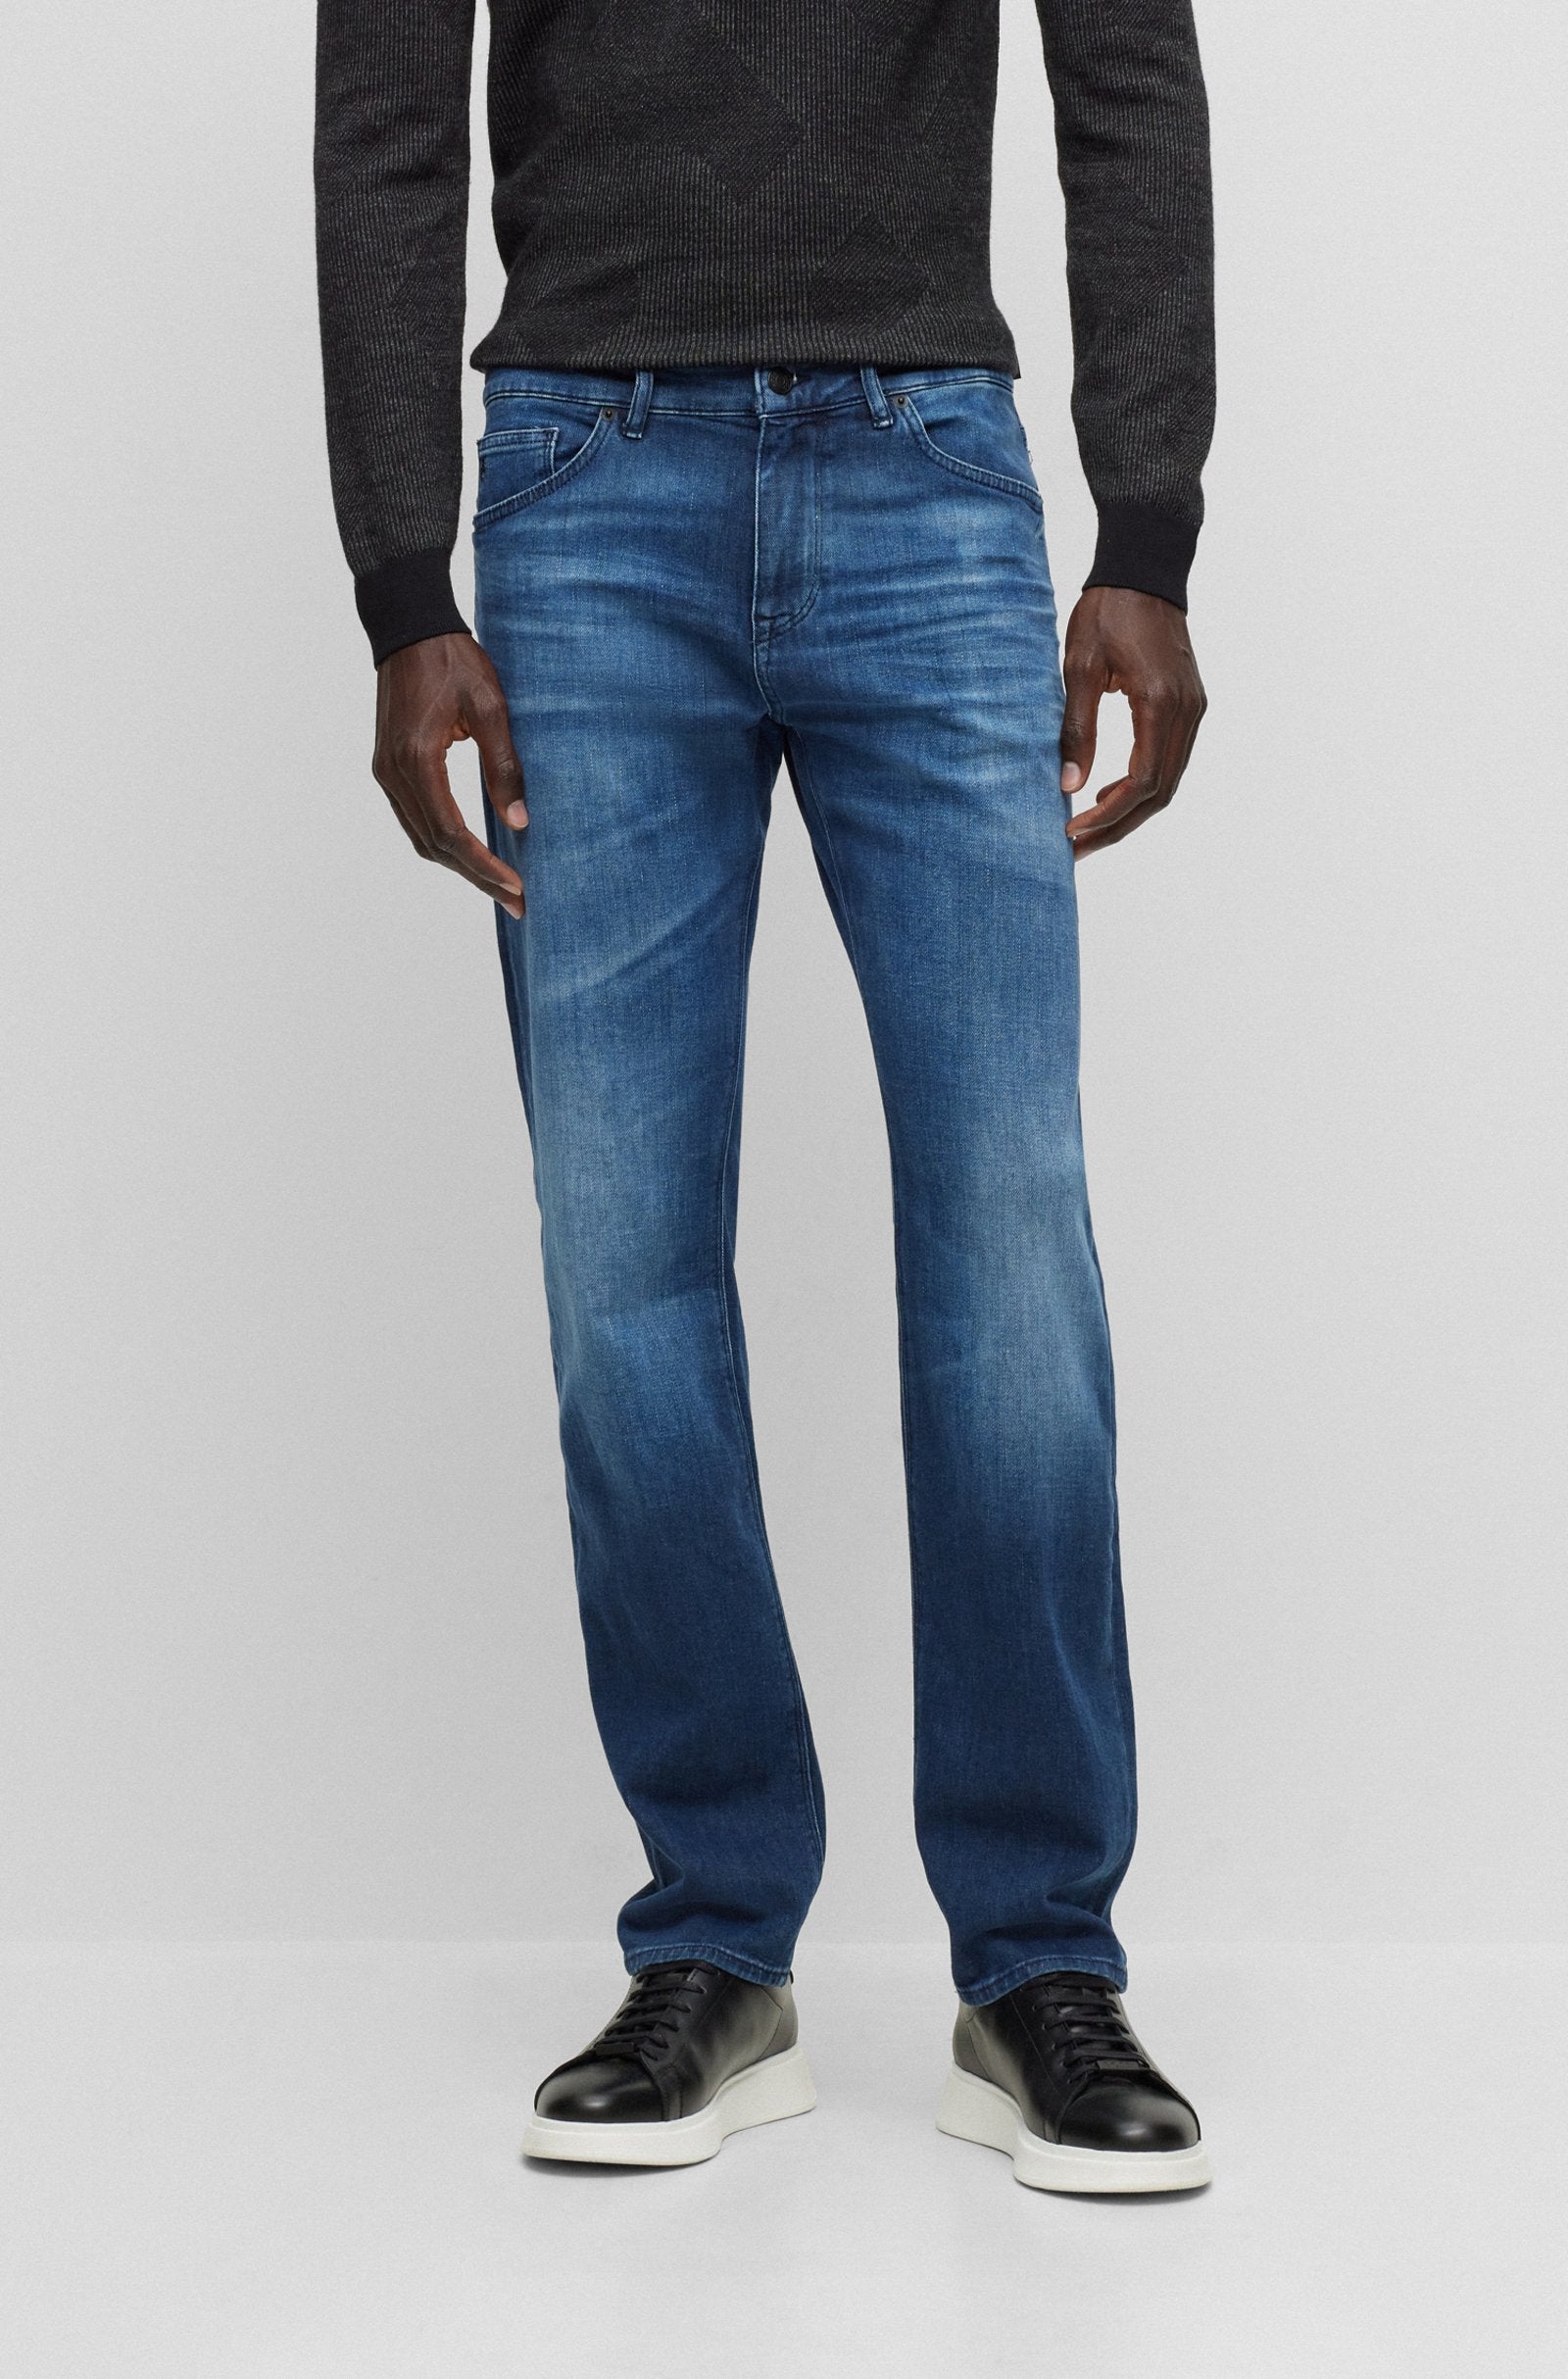 BOSS - MAINE3 Regular Fit Jeans In Italian Cashmere Touch Denim in Navy 50501065 418